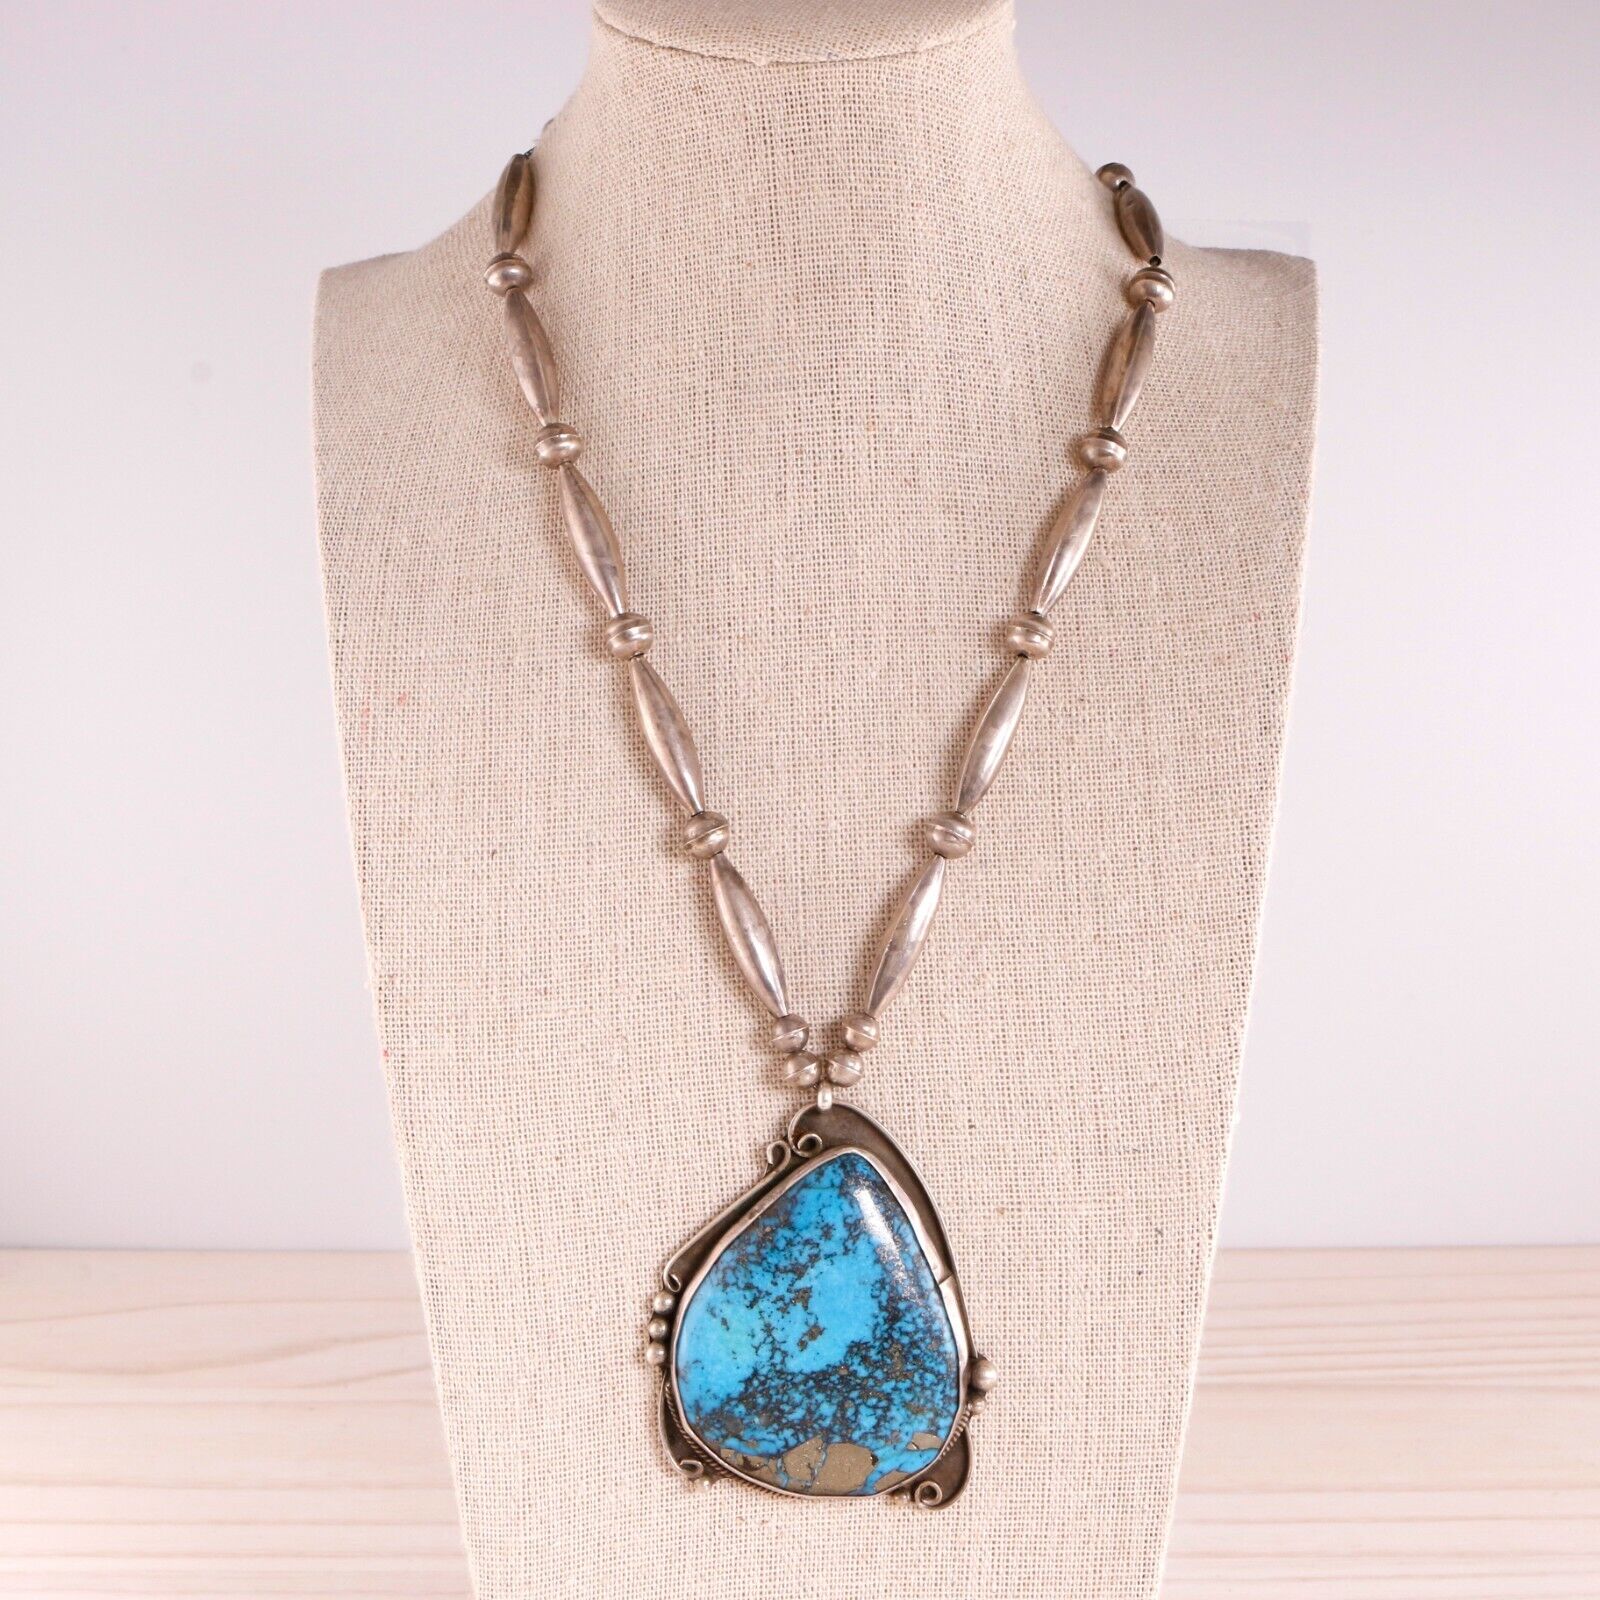 H Tsosie designed and crafted Turquoise Pendant